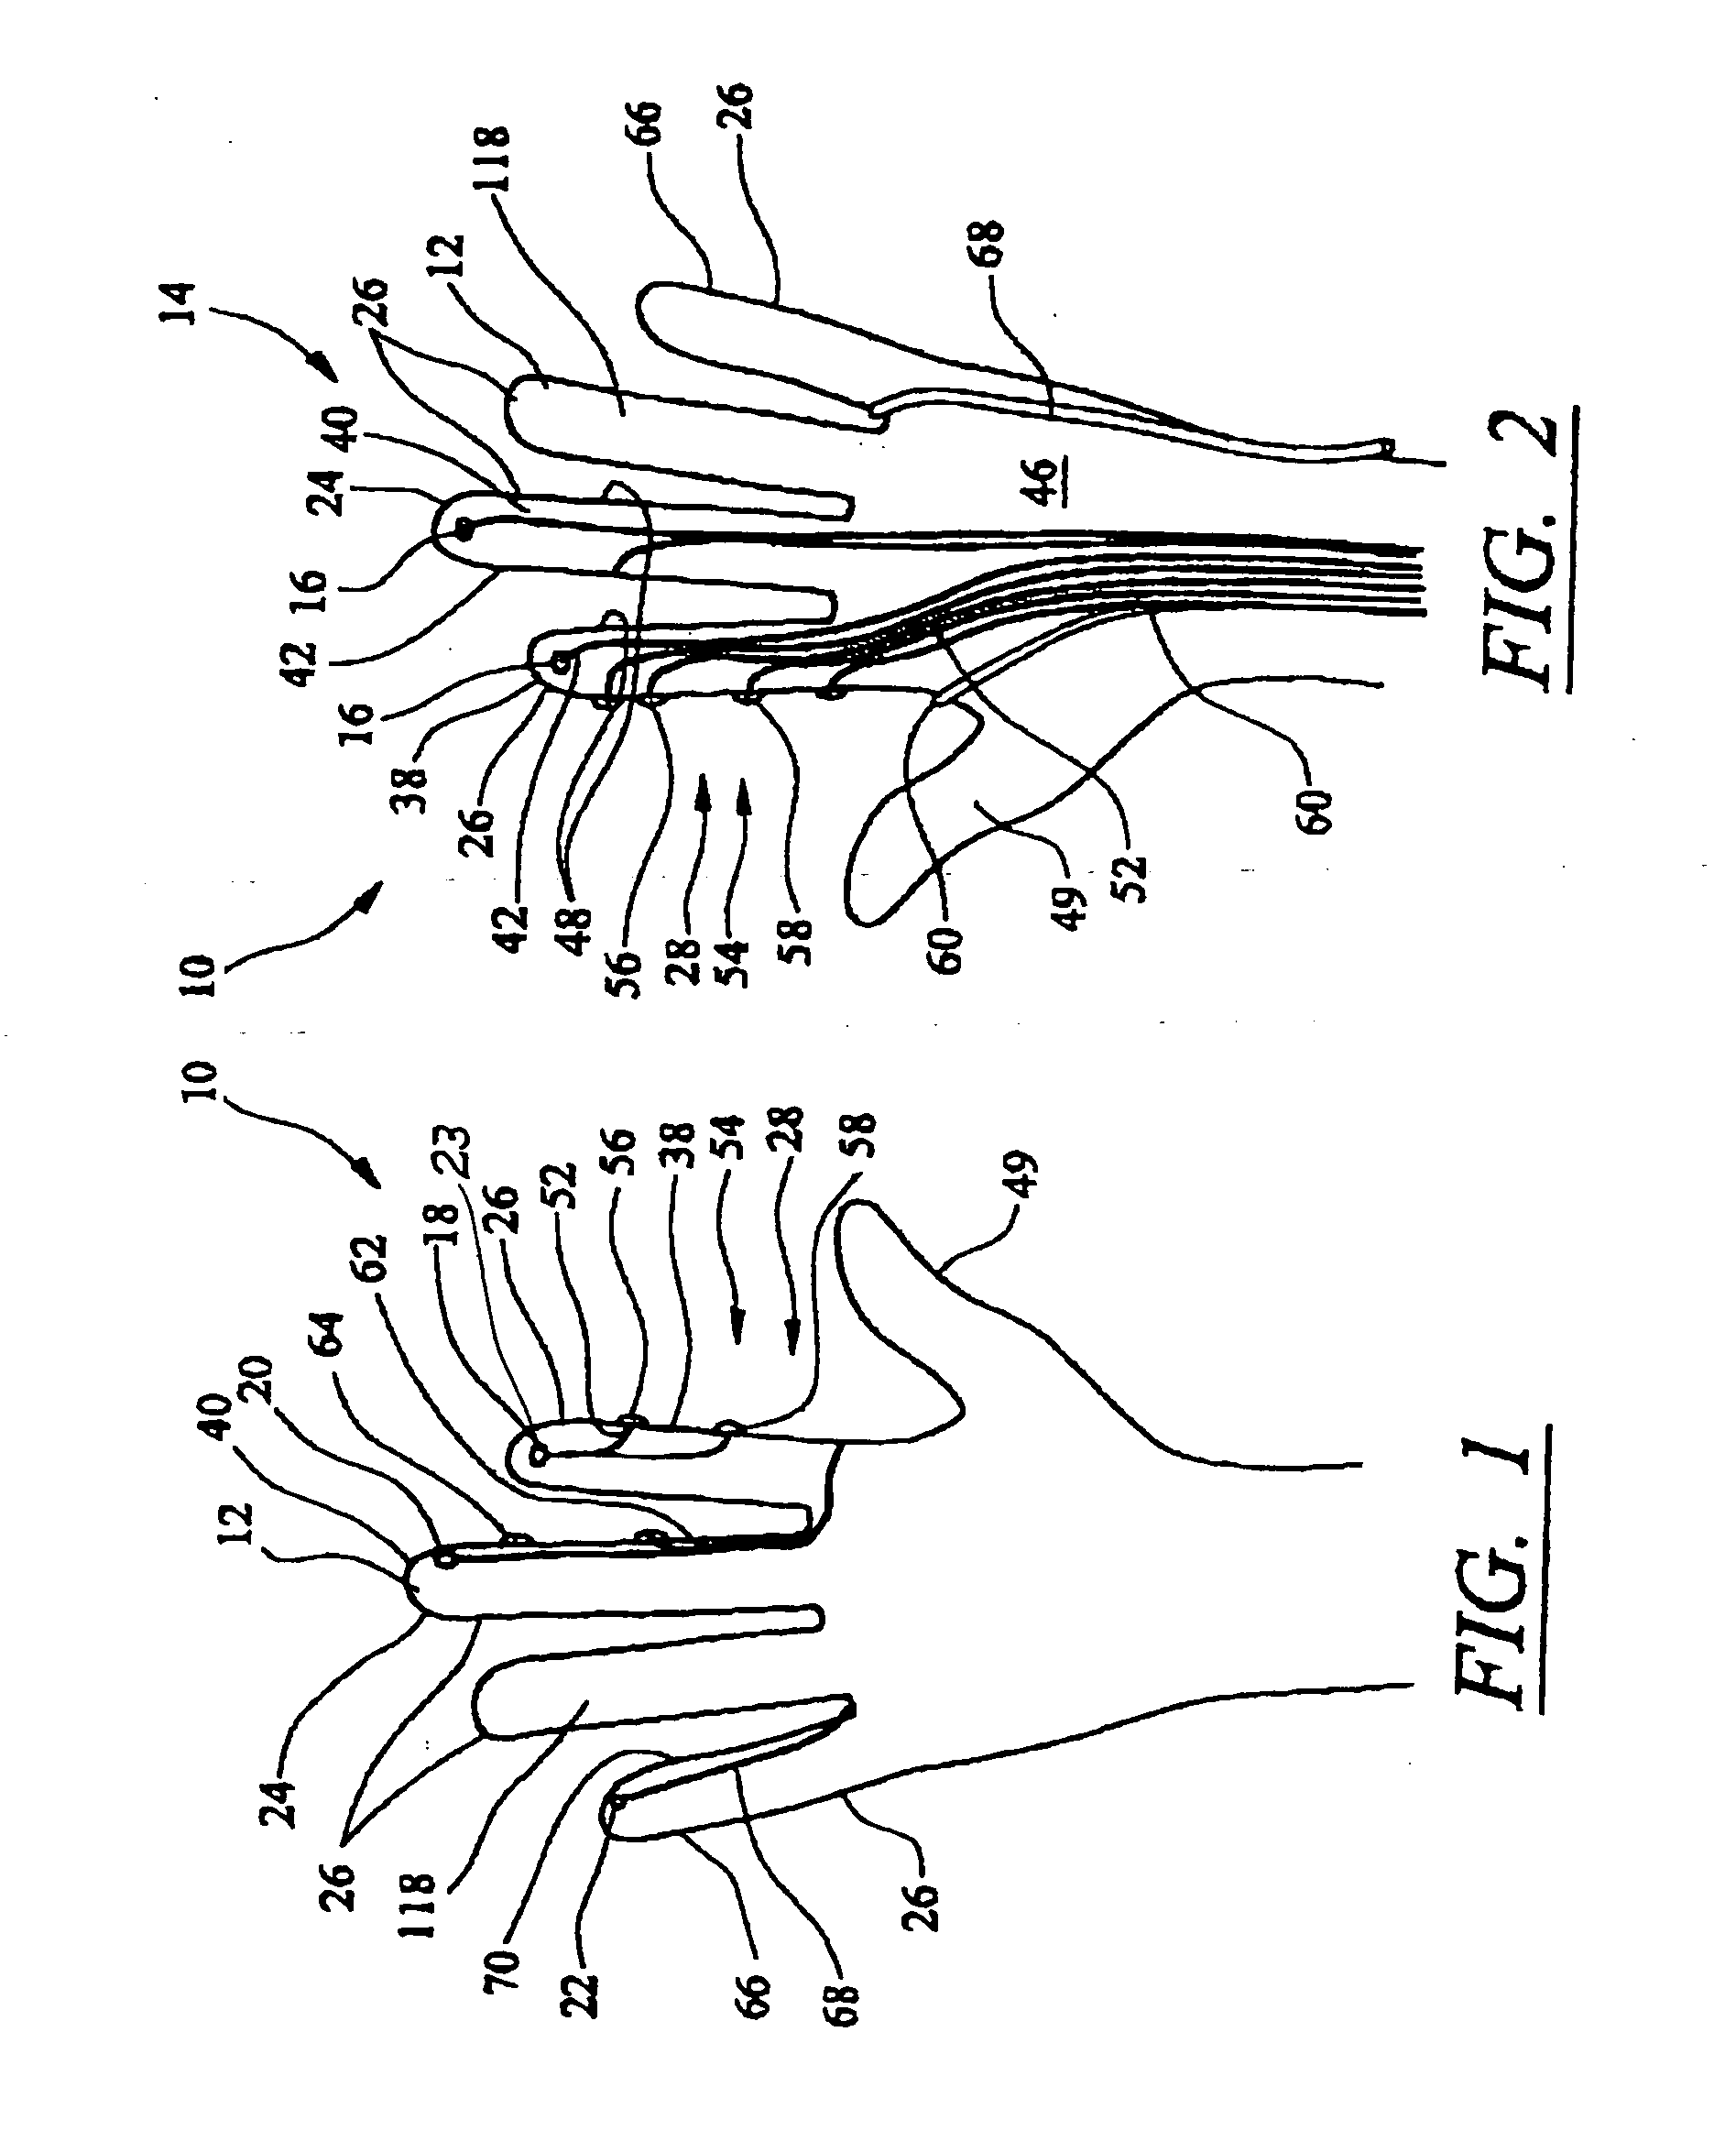 Surgical glove system